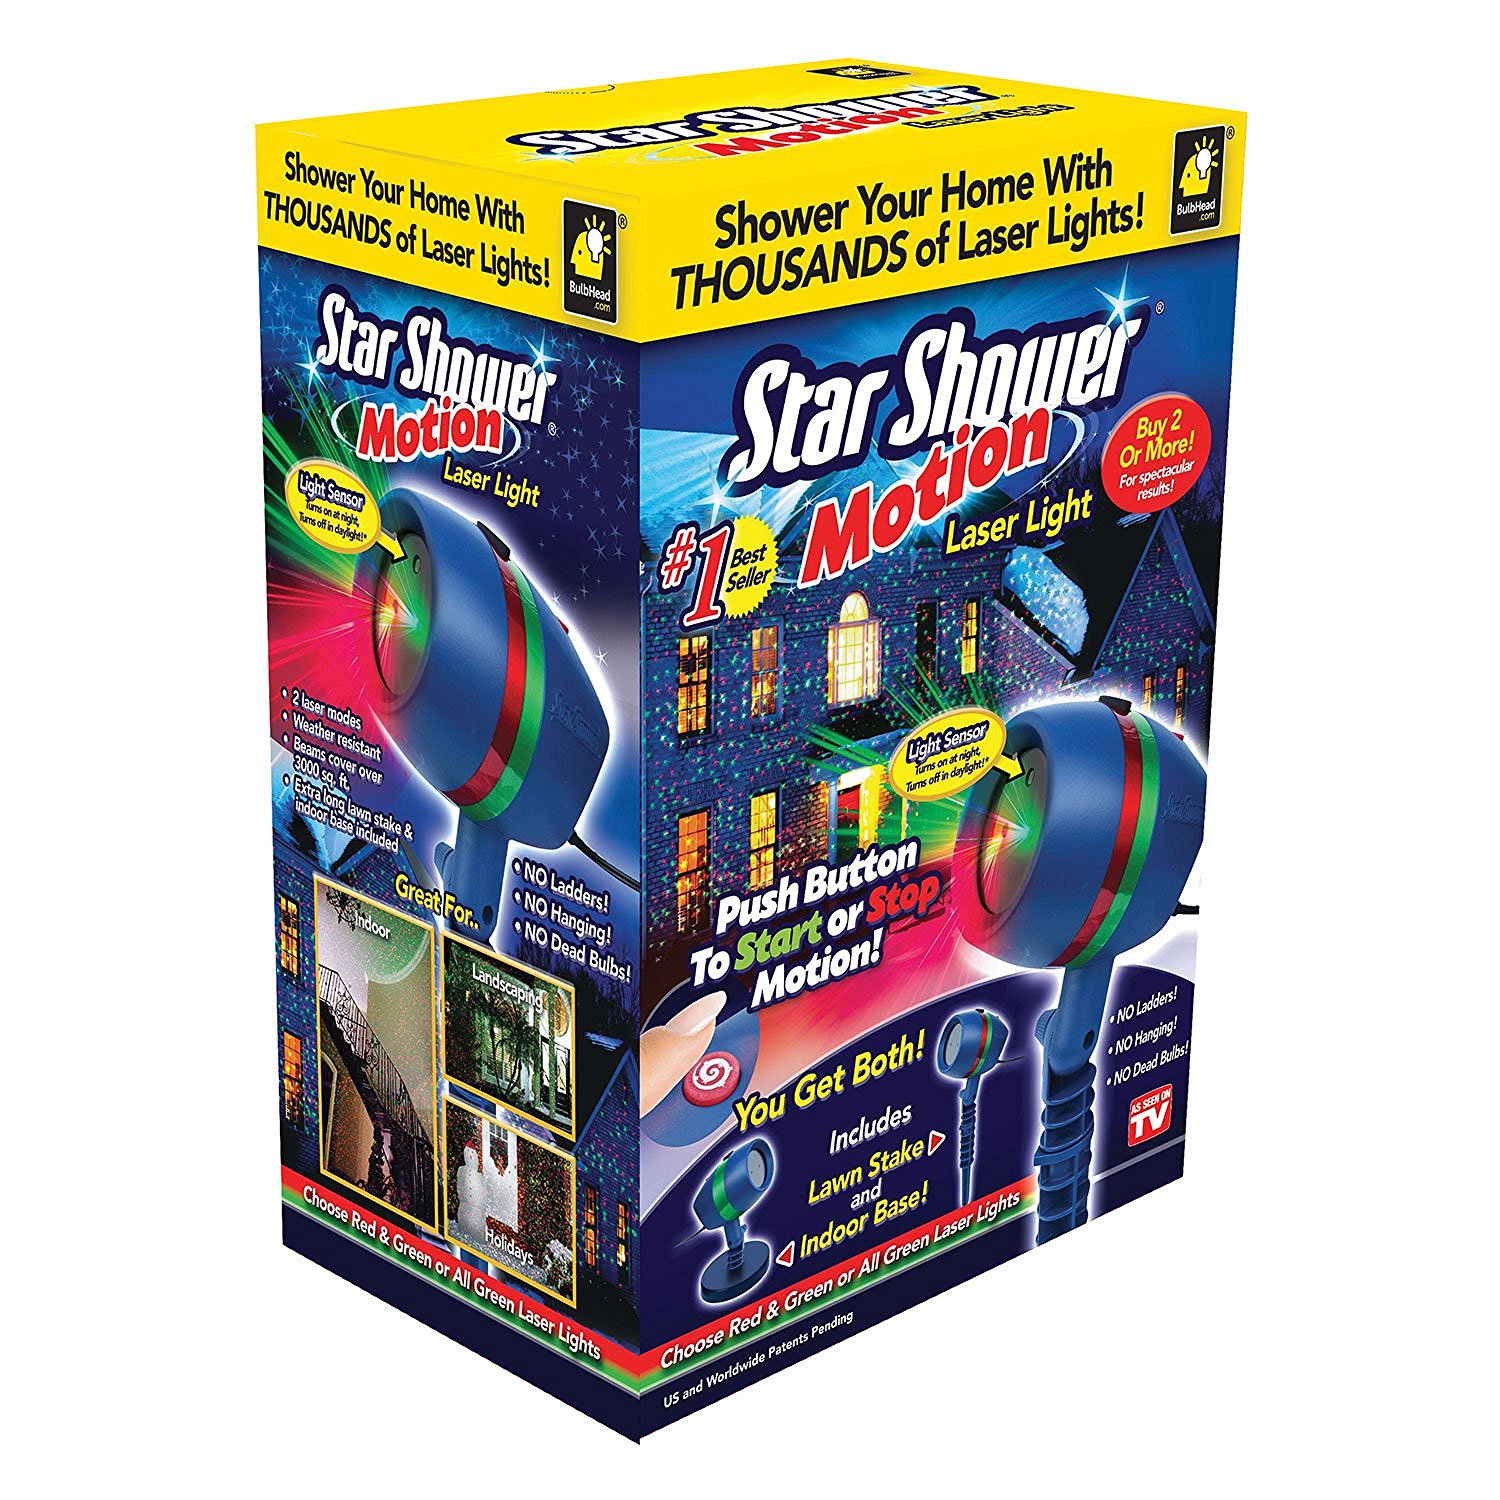 Save Big on Starshower Holiday Laser Light Projector – Just $35.49! Amazon Cyber Monday!